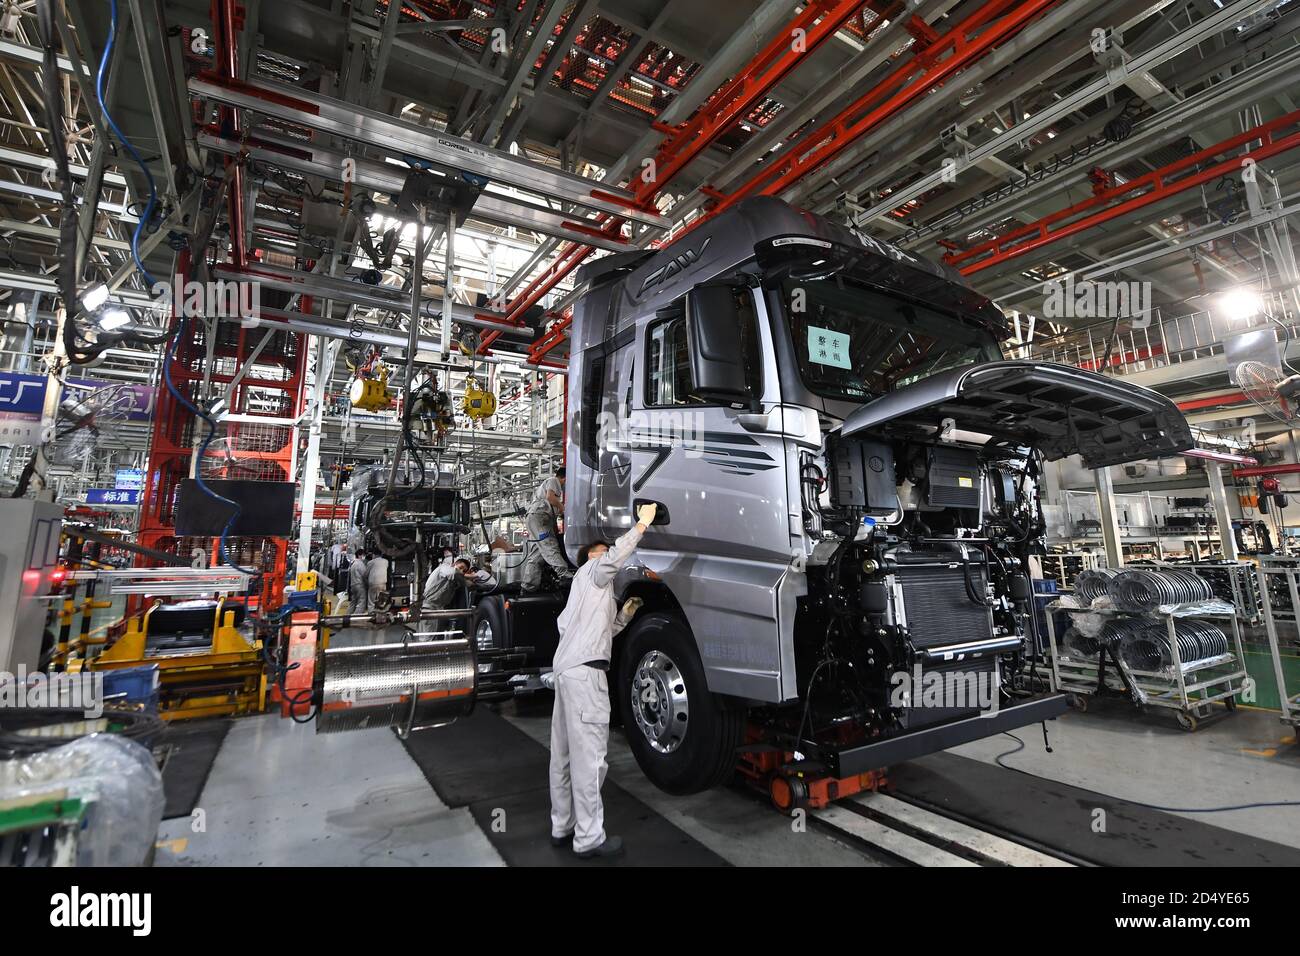 Changchun, China's Jilin Province. 23rd Sep, 2020. Workers assemble vehicles at a factory of the First Automotive Works (FAW) Group Co., Ltd. in Changchun, capital of northeast China's Jilin Province, Sept. 23, 2020. China's leading automaker First Automotive Works (FAW) Group Co., Ltd. sold 2,656,744 vehicles in the first three quarters of the year, up 8 percent year on year, according to corporate sources. Credit: Zhang Nan/Xinhua/Alamy Live News Stock Photo